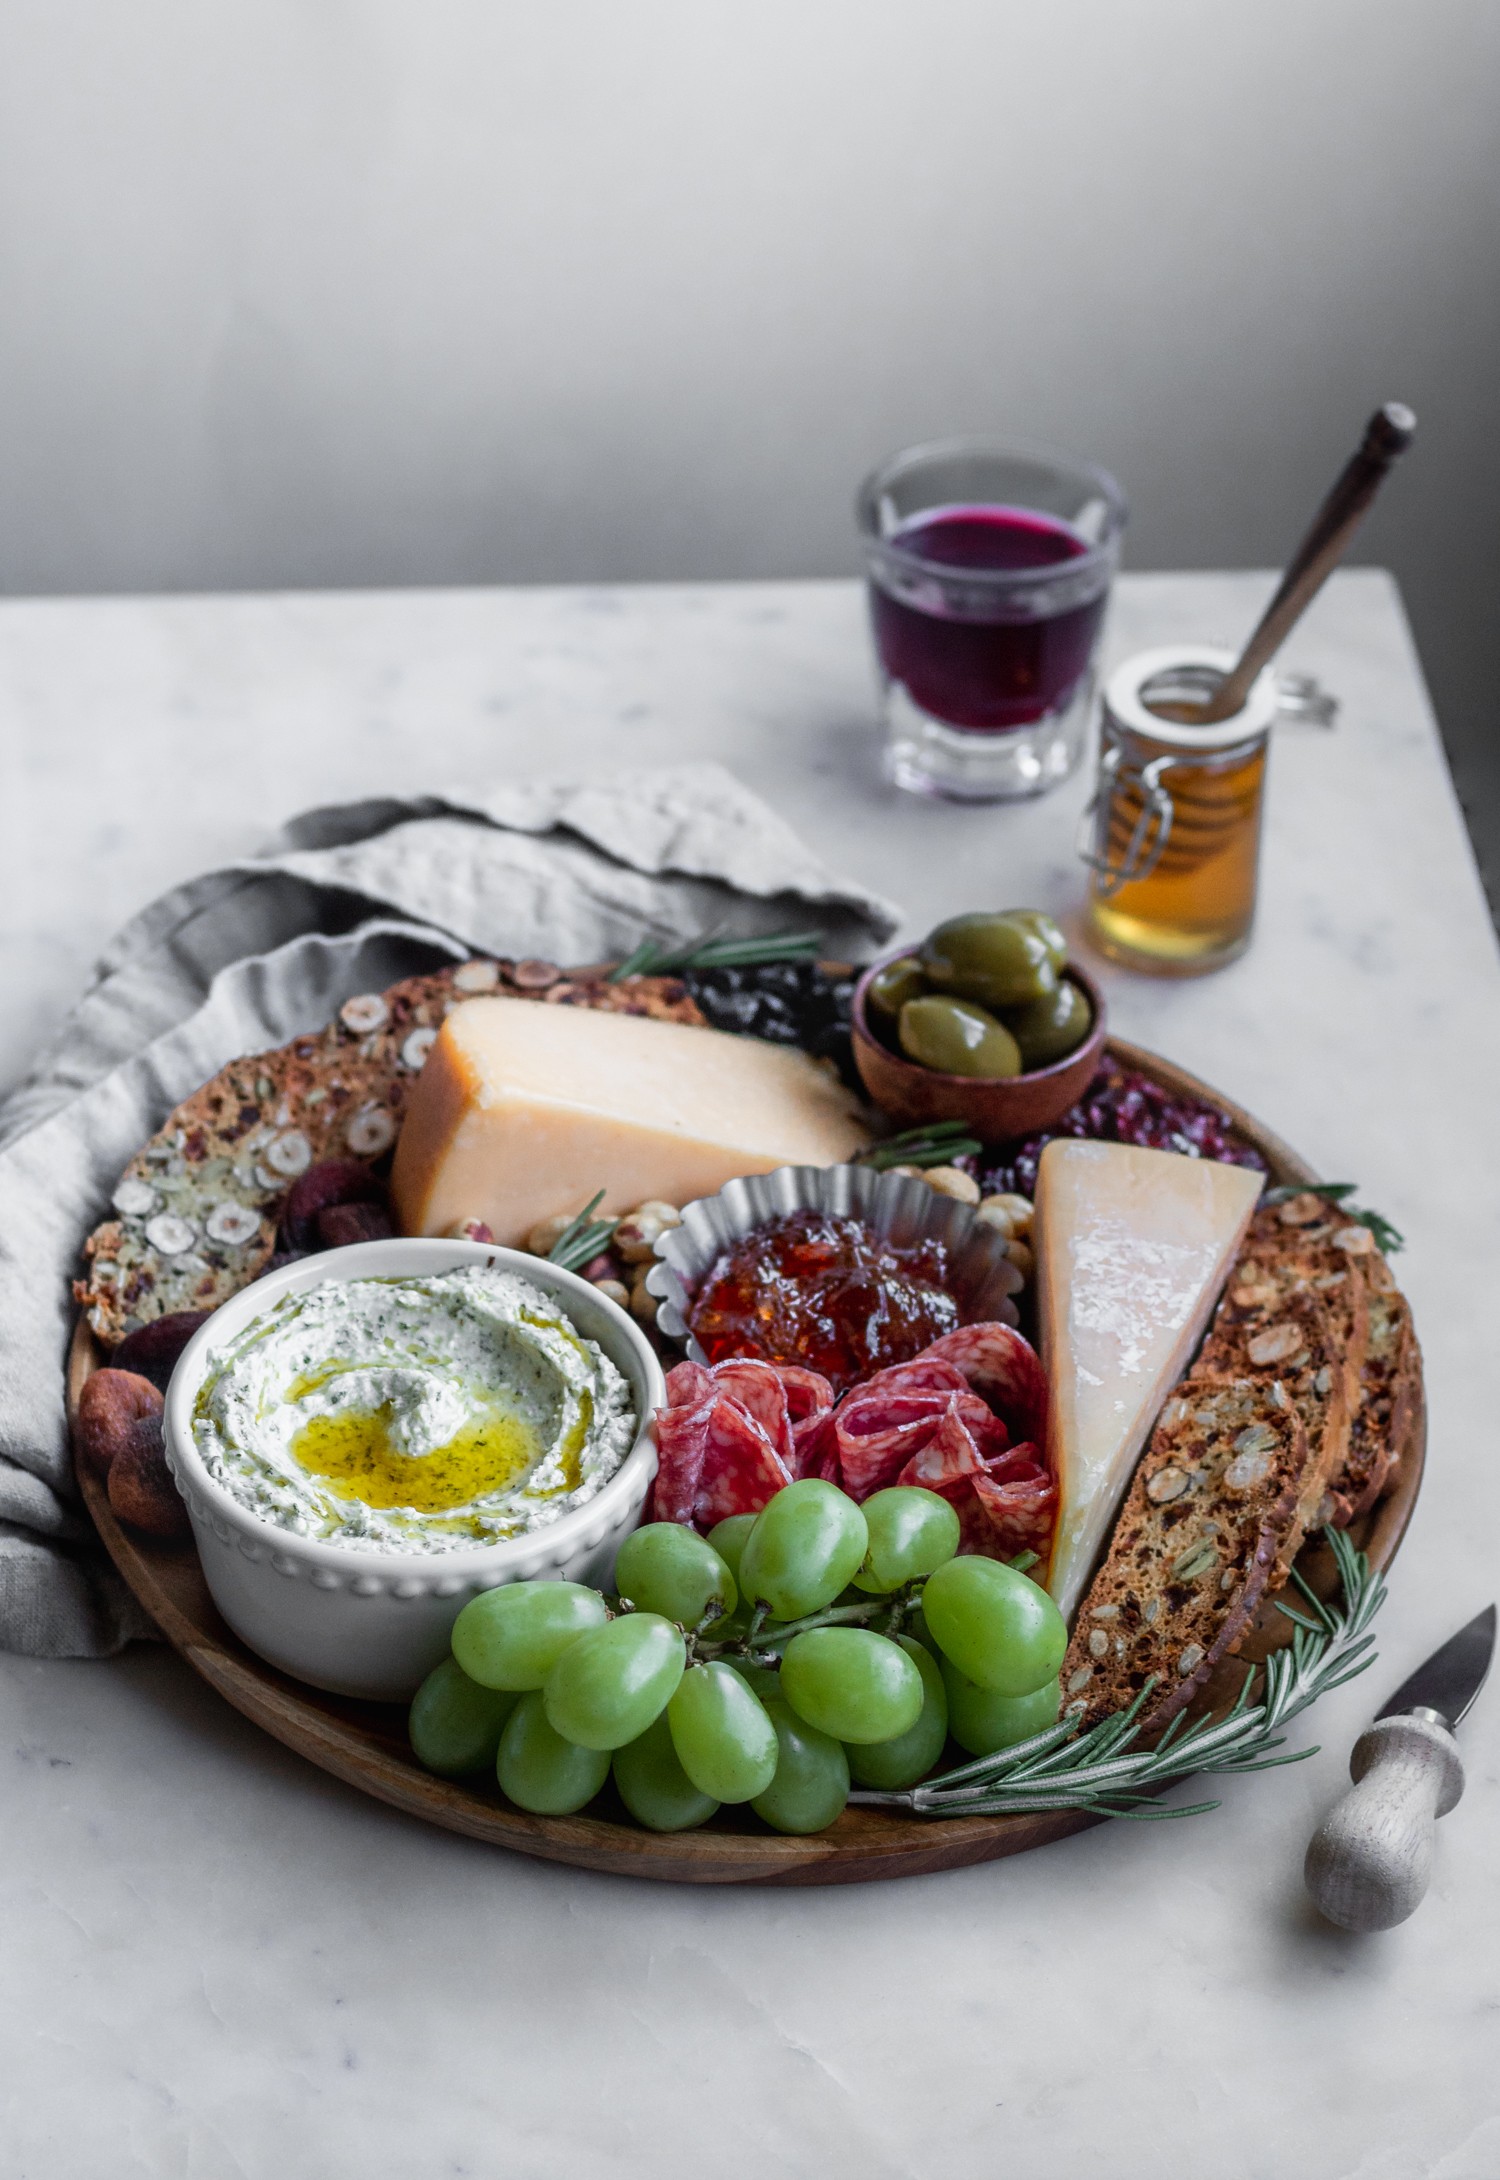 A side image of a cheese board on a wood circular plate placed on a marble counter next to a glass of red wine and jar of honey.